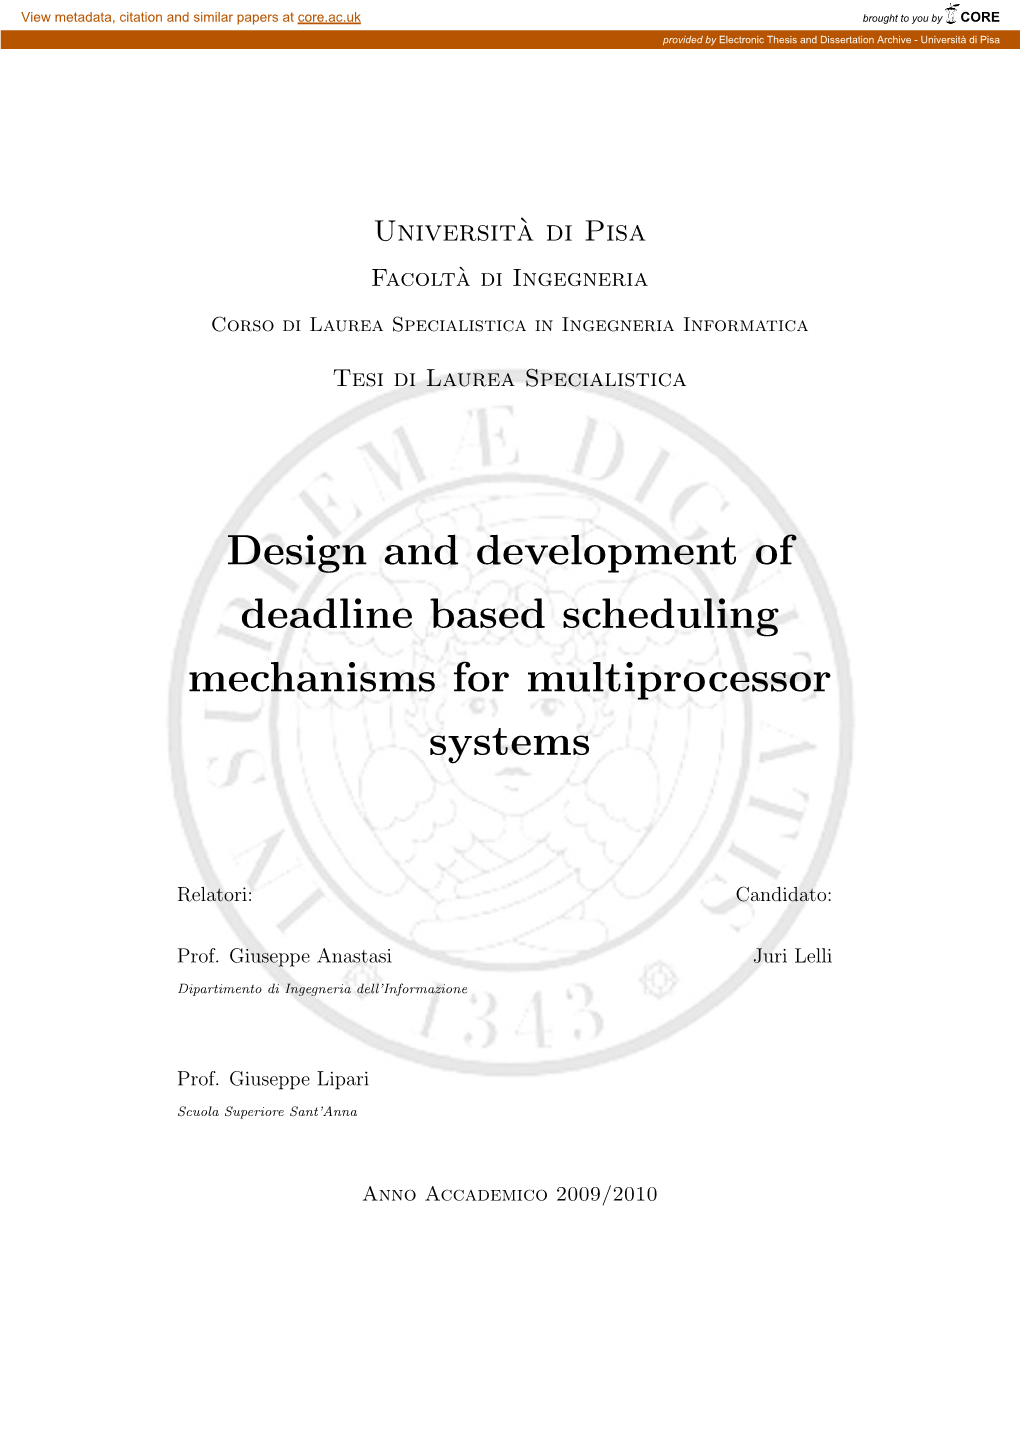 Design and Development of Deadline Based Scheduling Mechanisms for Multiprocessor Systems